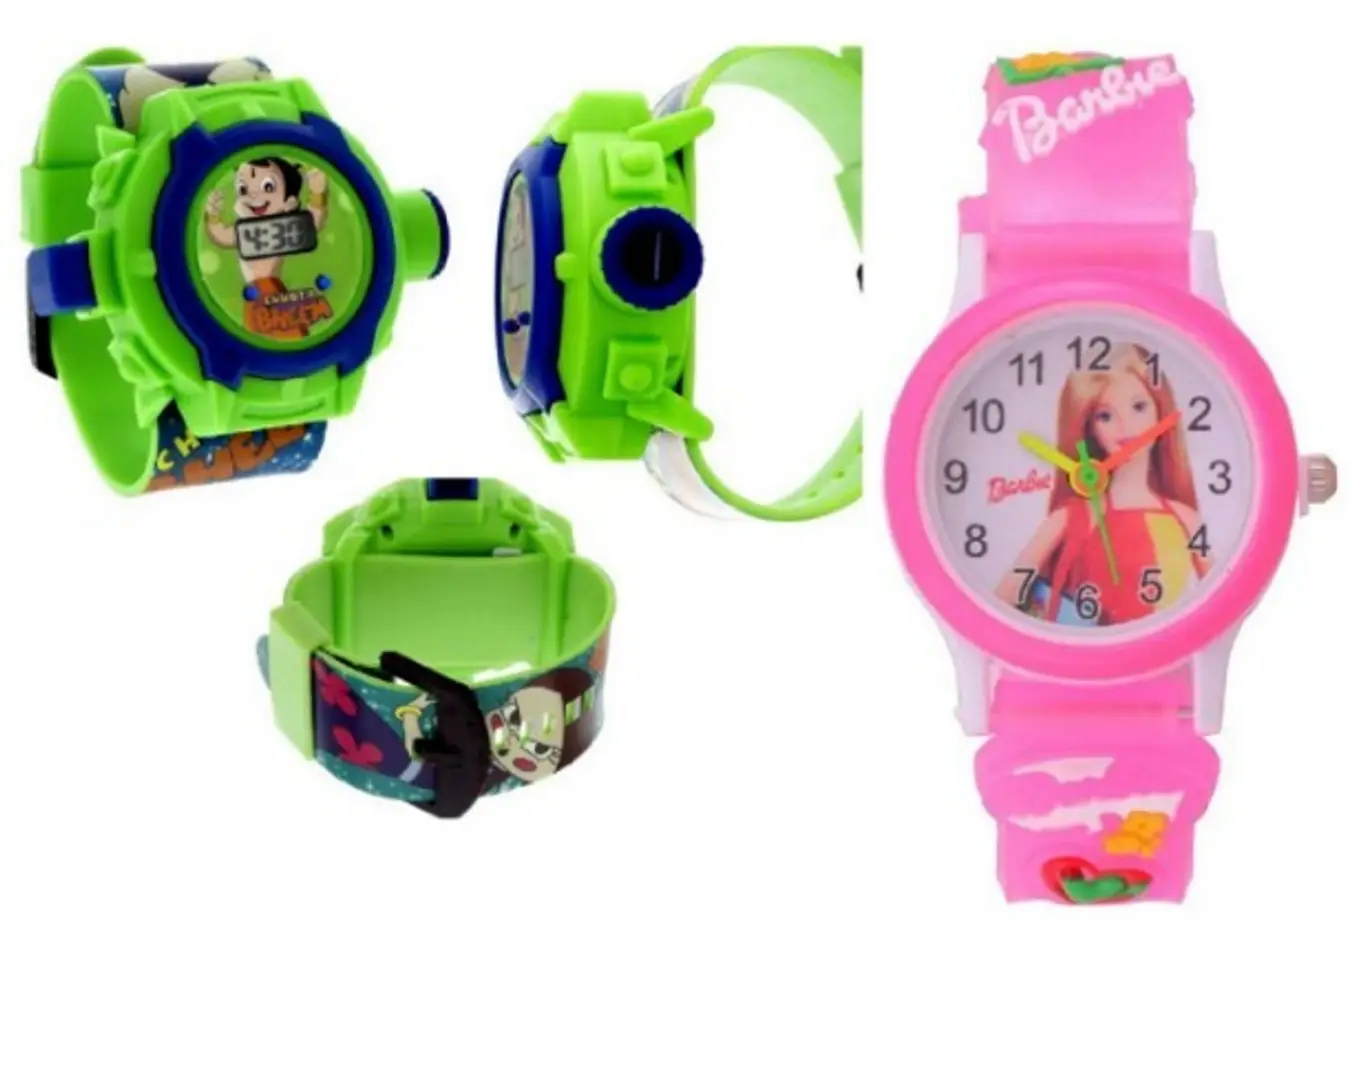 Vente Chota Bheem Projector Digital Watch With 24 Images for Kids Price in  India - Buy Vente Chota Bheem Projector Digital Watch With 24 Images for  Kids online at Flipkart.com